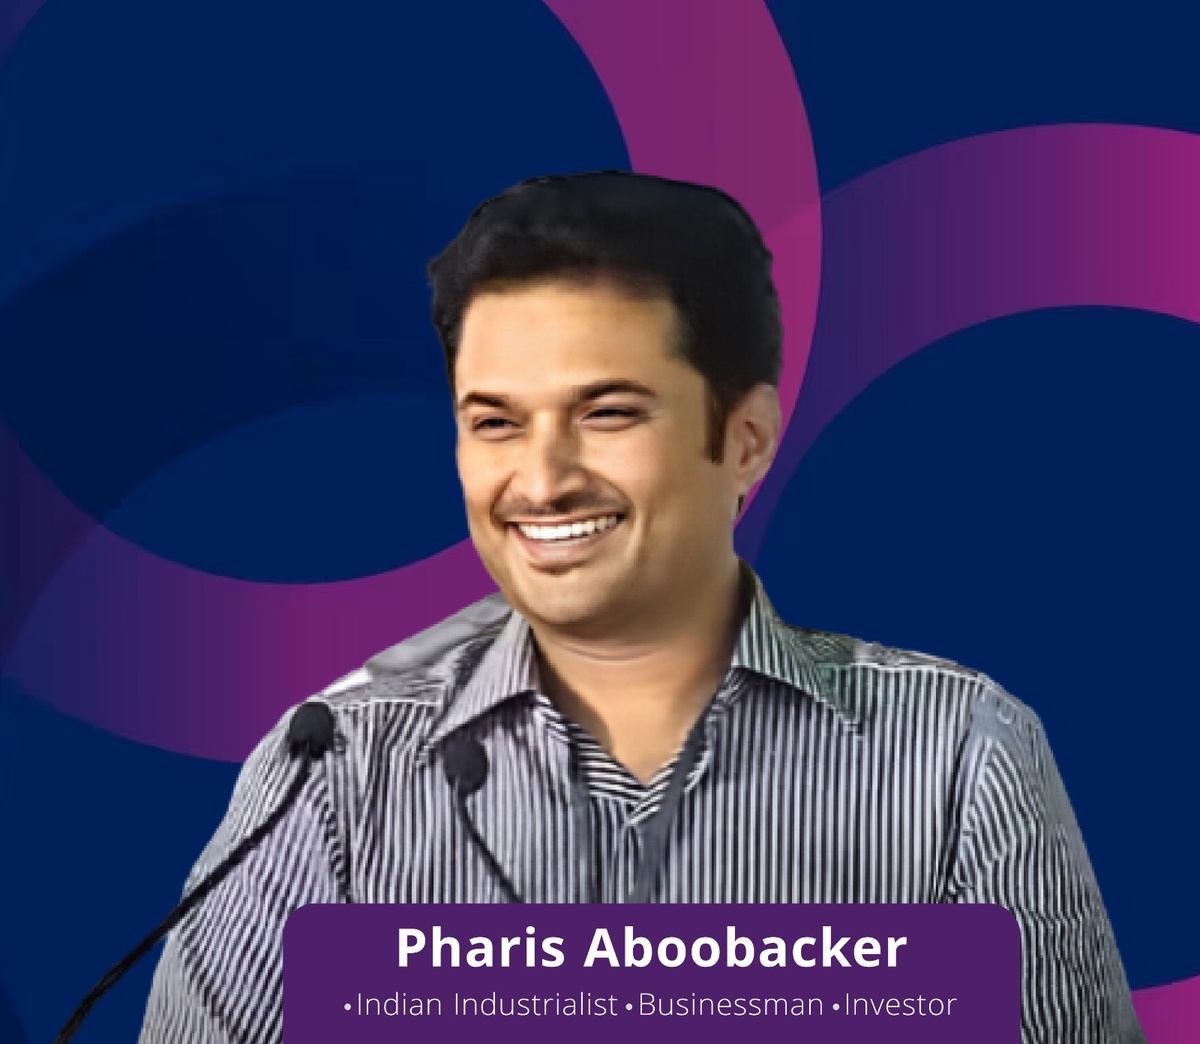 Pharis Aboobacker: Charting a Trail of Success Through Values and Vision